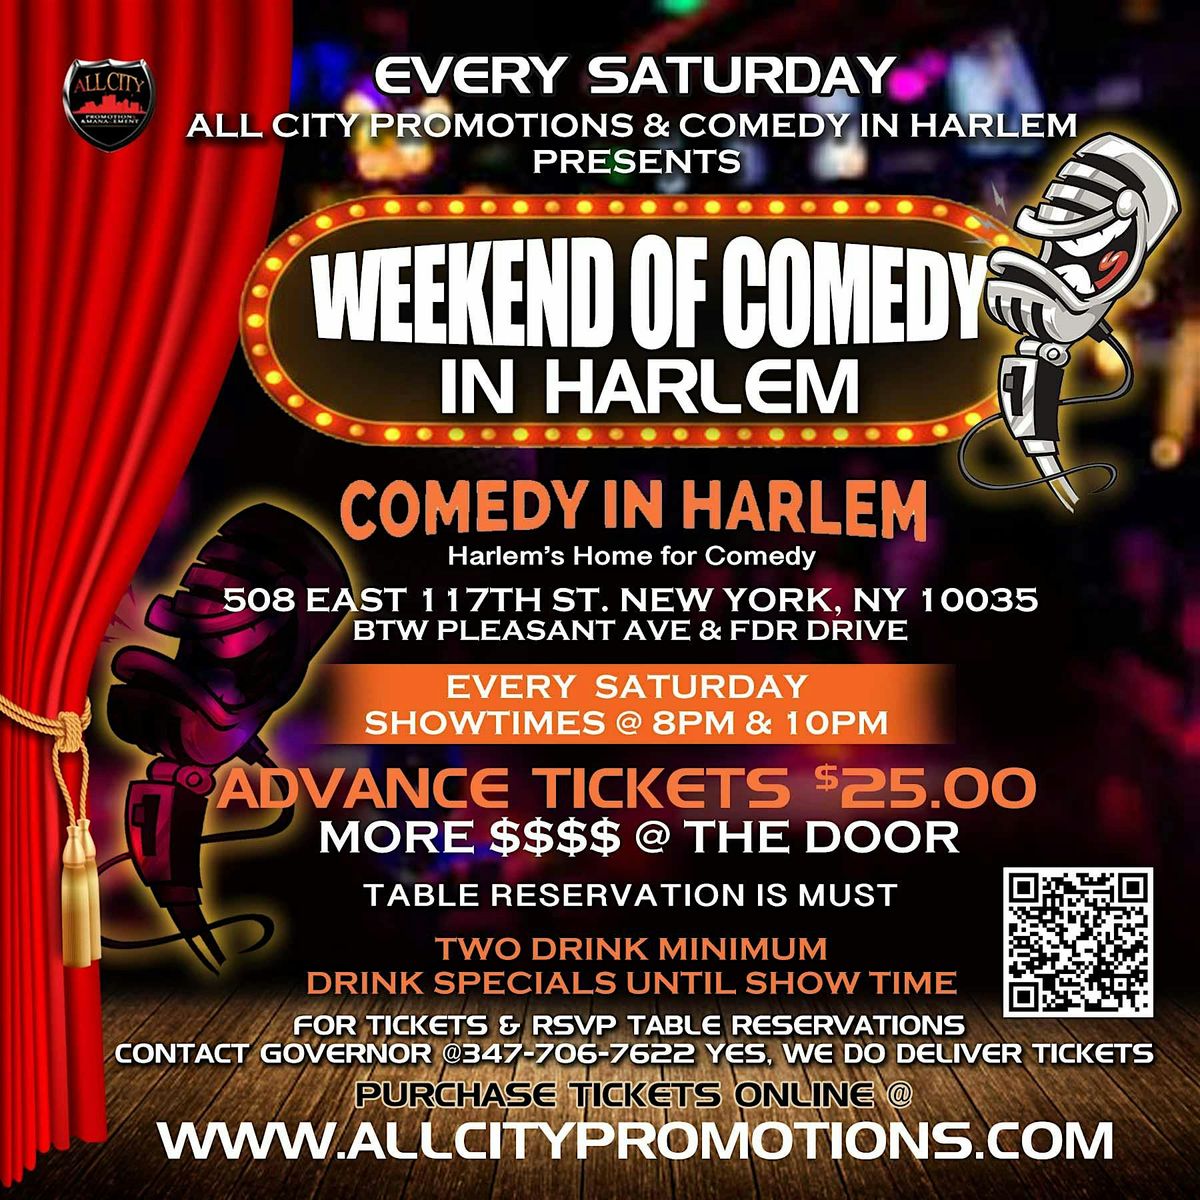 Saturday June 29th, Weekend of Comedy In Harlem @ Comedy In Harlem